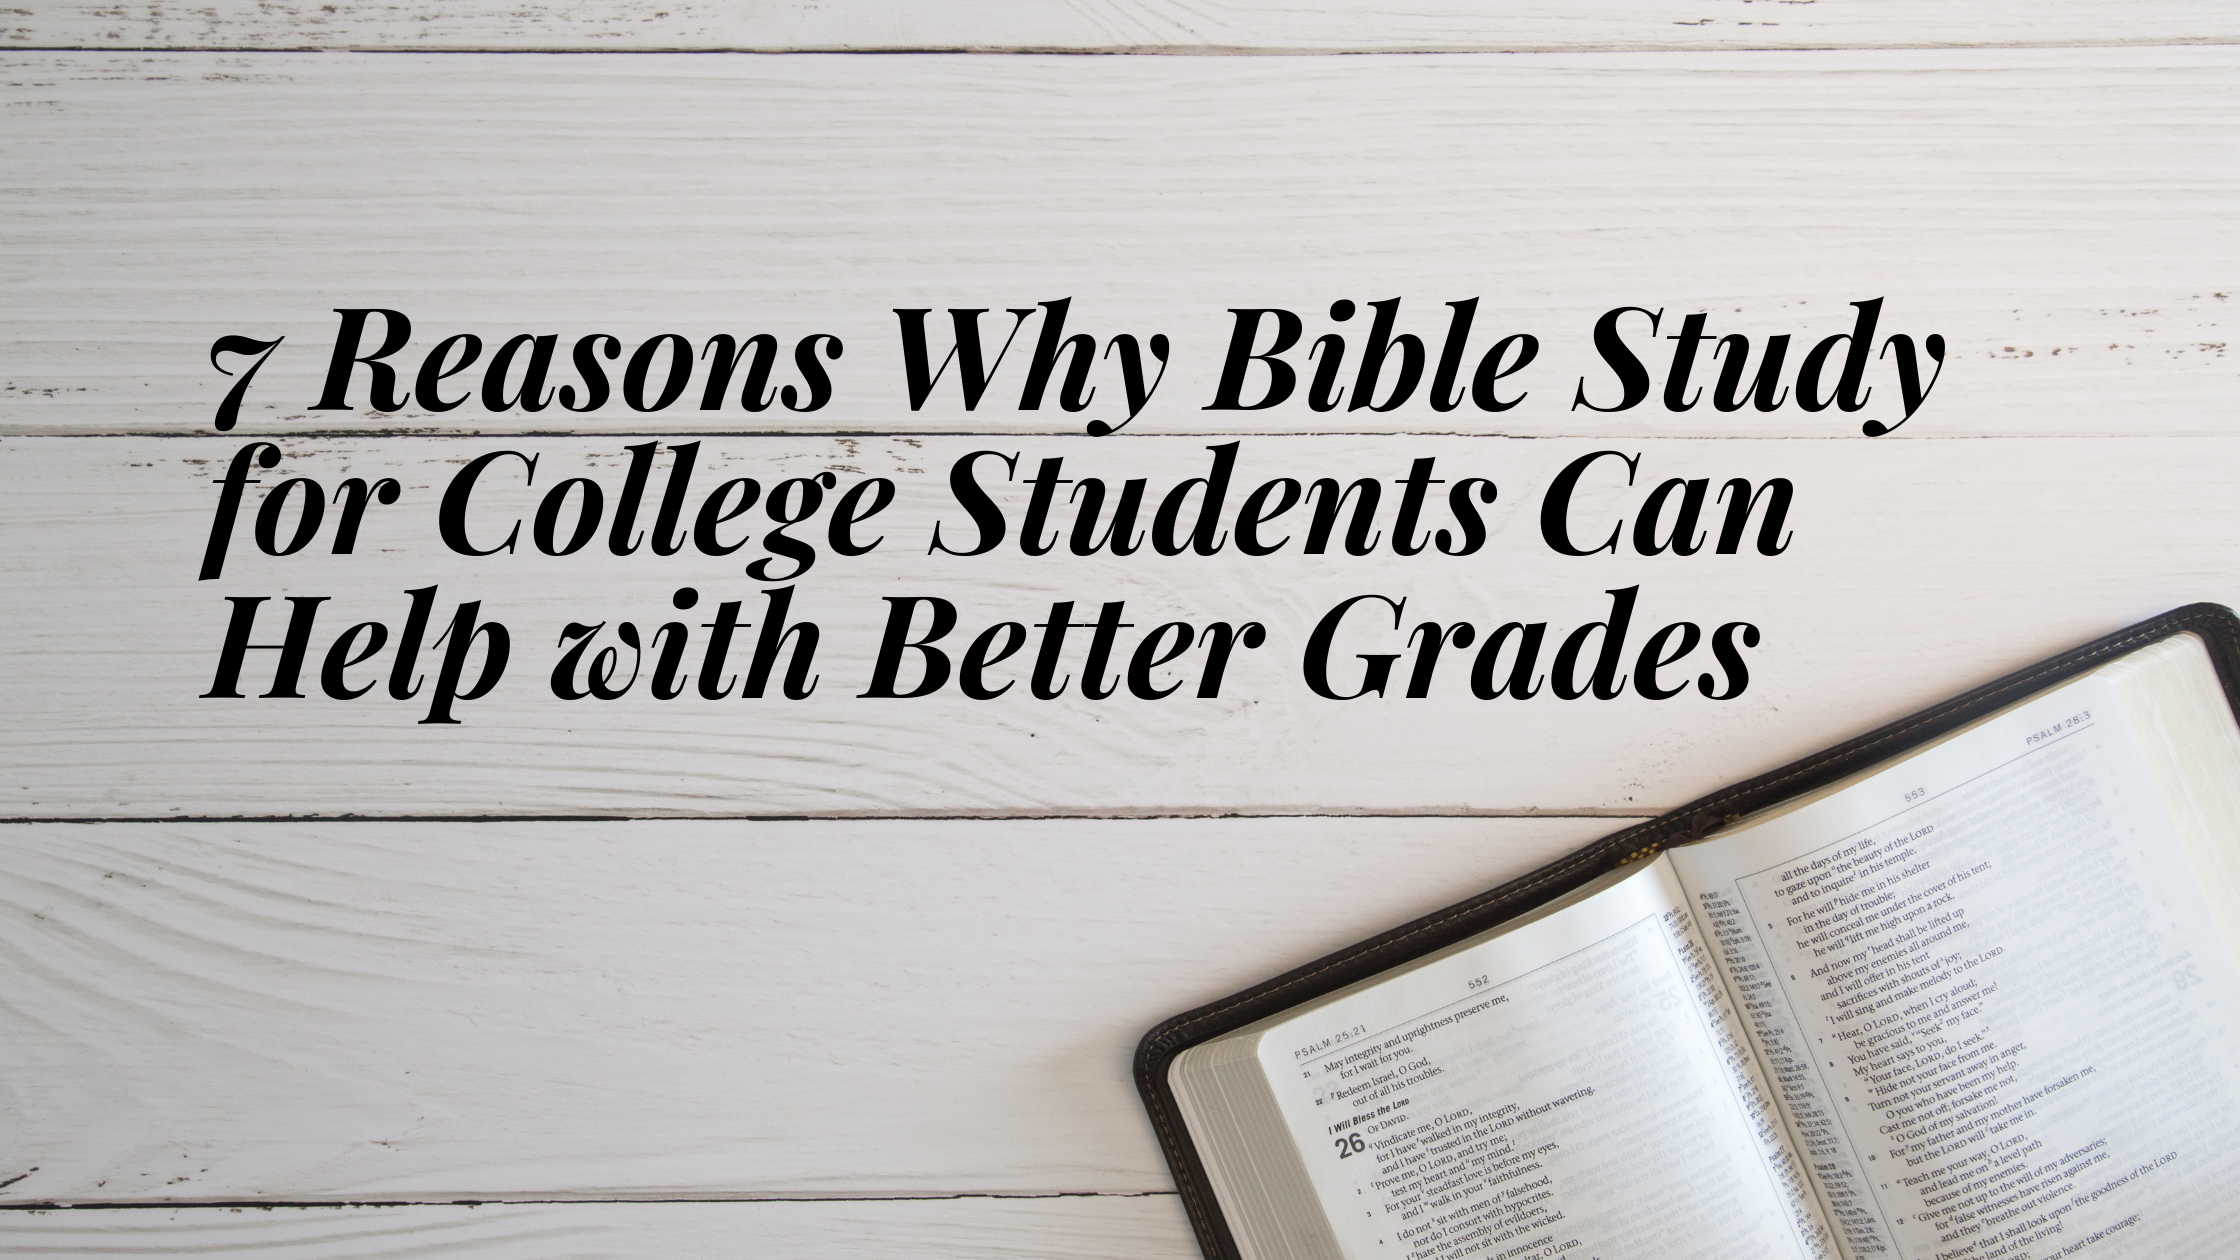 Image of 7 Reasons Why Bible Study for College Students Can Help with Better Grades